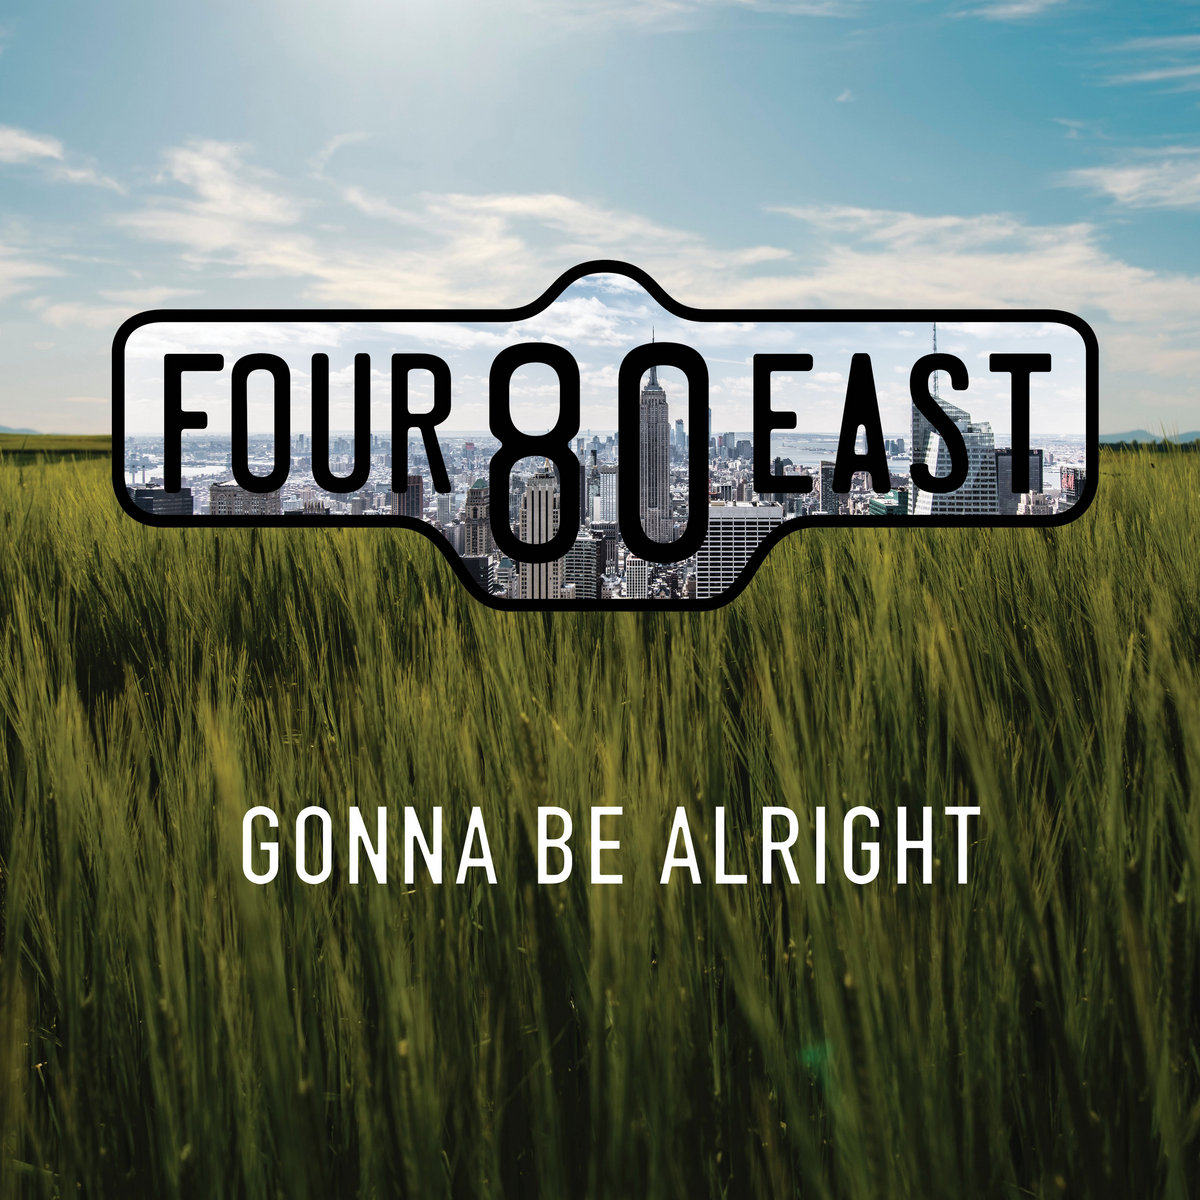 Now Playing This Time Around by Four80East On 969theoasis.com 
 Buy song links.autopo.st/c8y8